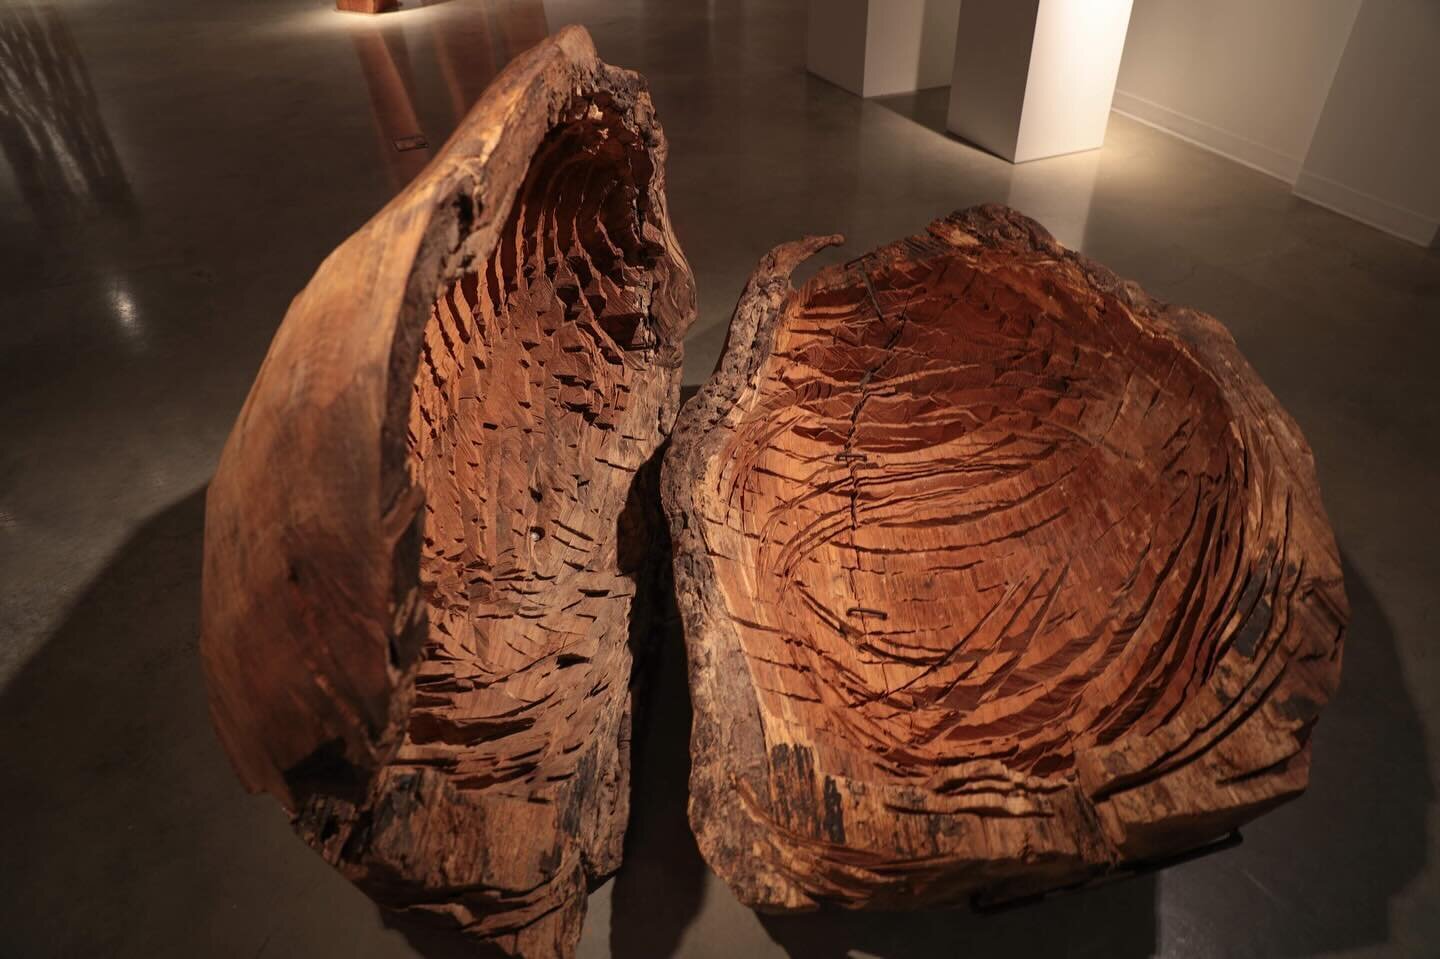 Emilie explored verticality in many of her sculptures. Emilie also explored directionality. As is evidenced by Lament, an immense triptych sculpture that rises above 15 feet, the emotion one feels while experiencing it, in part, comes from the direct